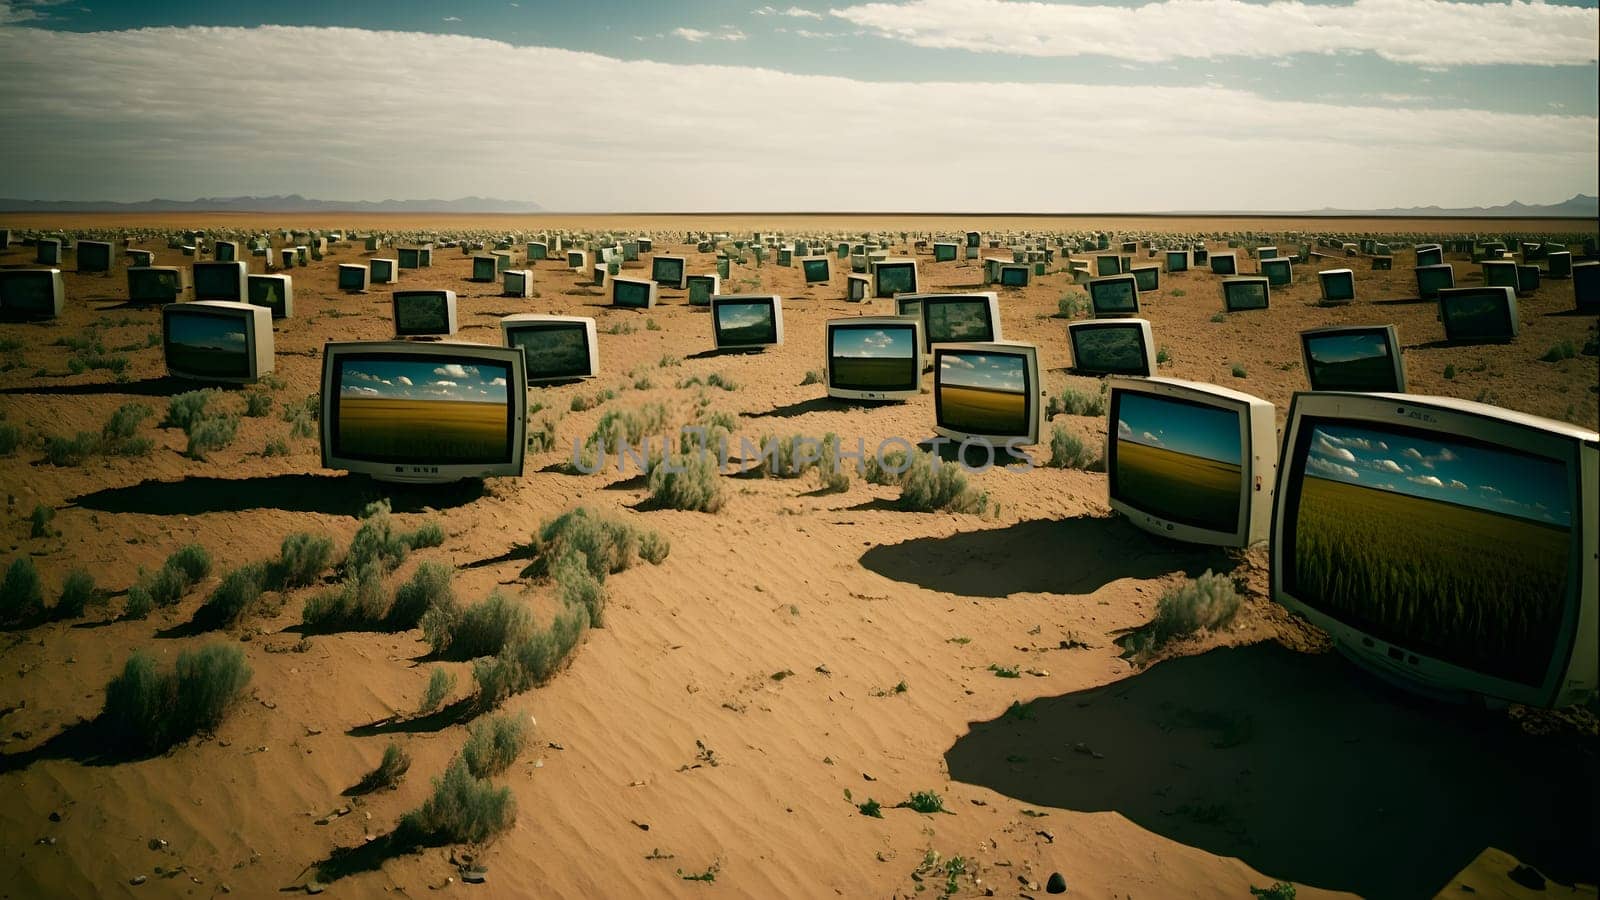 desert covered with old analog tv sets at summer daylight, neural network generated art. Digitally generated image. Not based on any actual person, scene or pattern.